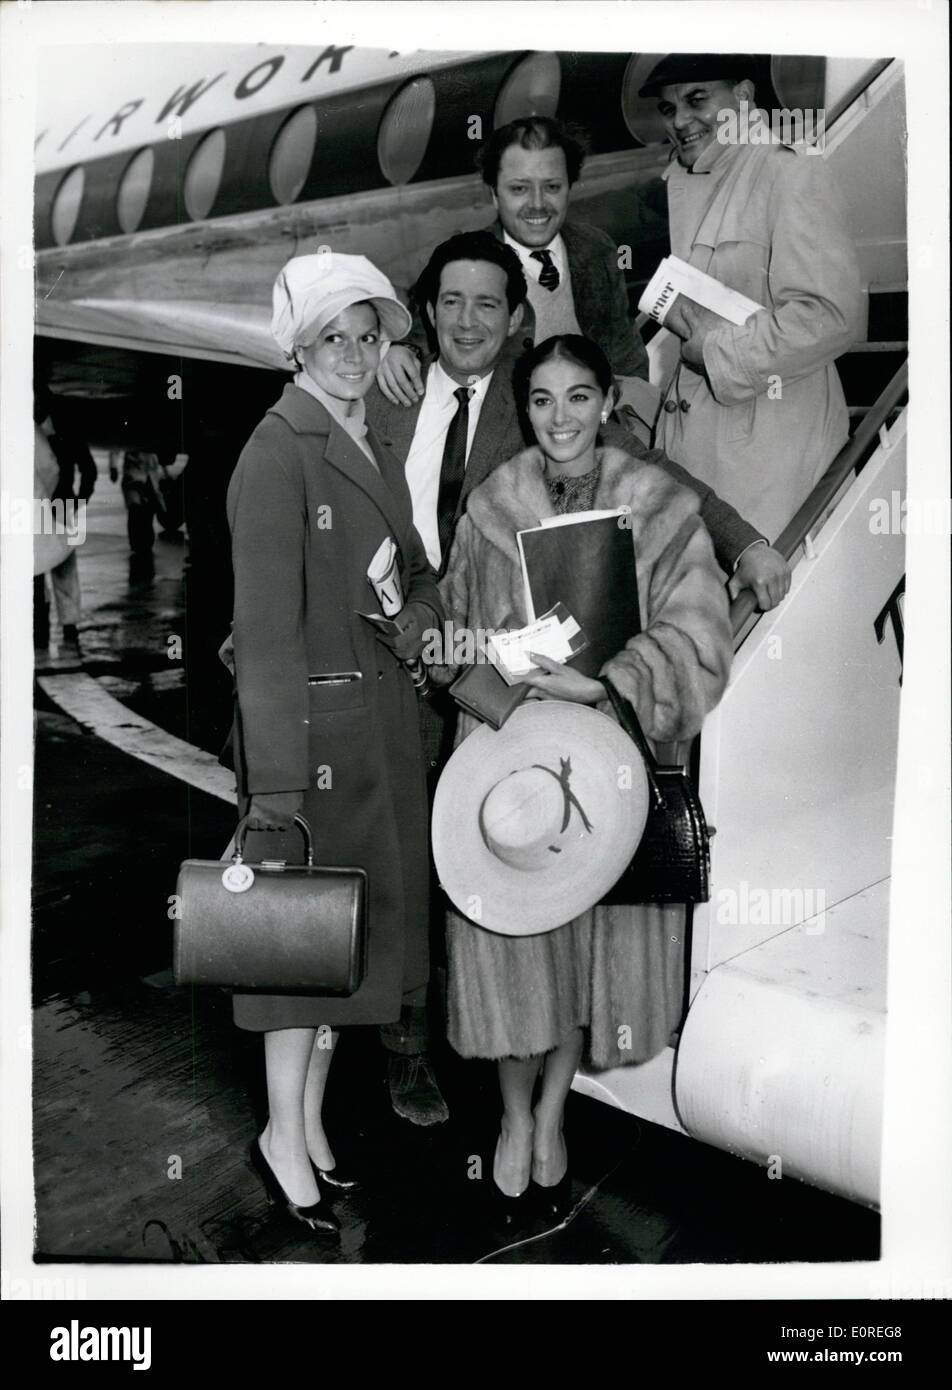 Apr. 04, 1959 - Film stars leave for Canary Islands: Film stars including Eva Bartok, Pier Angeli, Richard Attenborough and John Gregson, left Gatwick Airport today for the Canary Islands, for location shooting of the film ''S.O.S. Pacific''. Photo shows Eva Bartok, John Gregson and Clifford Evans, pictured prior to their departure today. Stock Photo